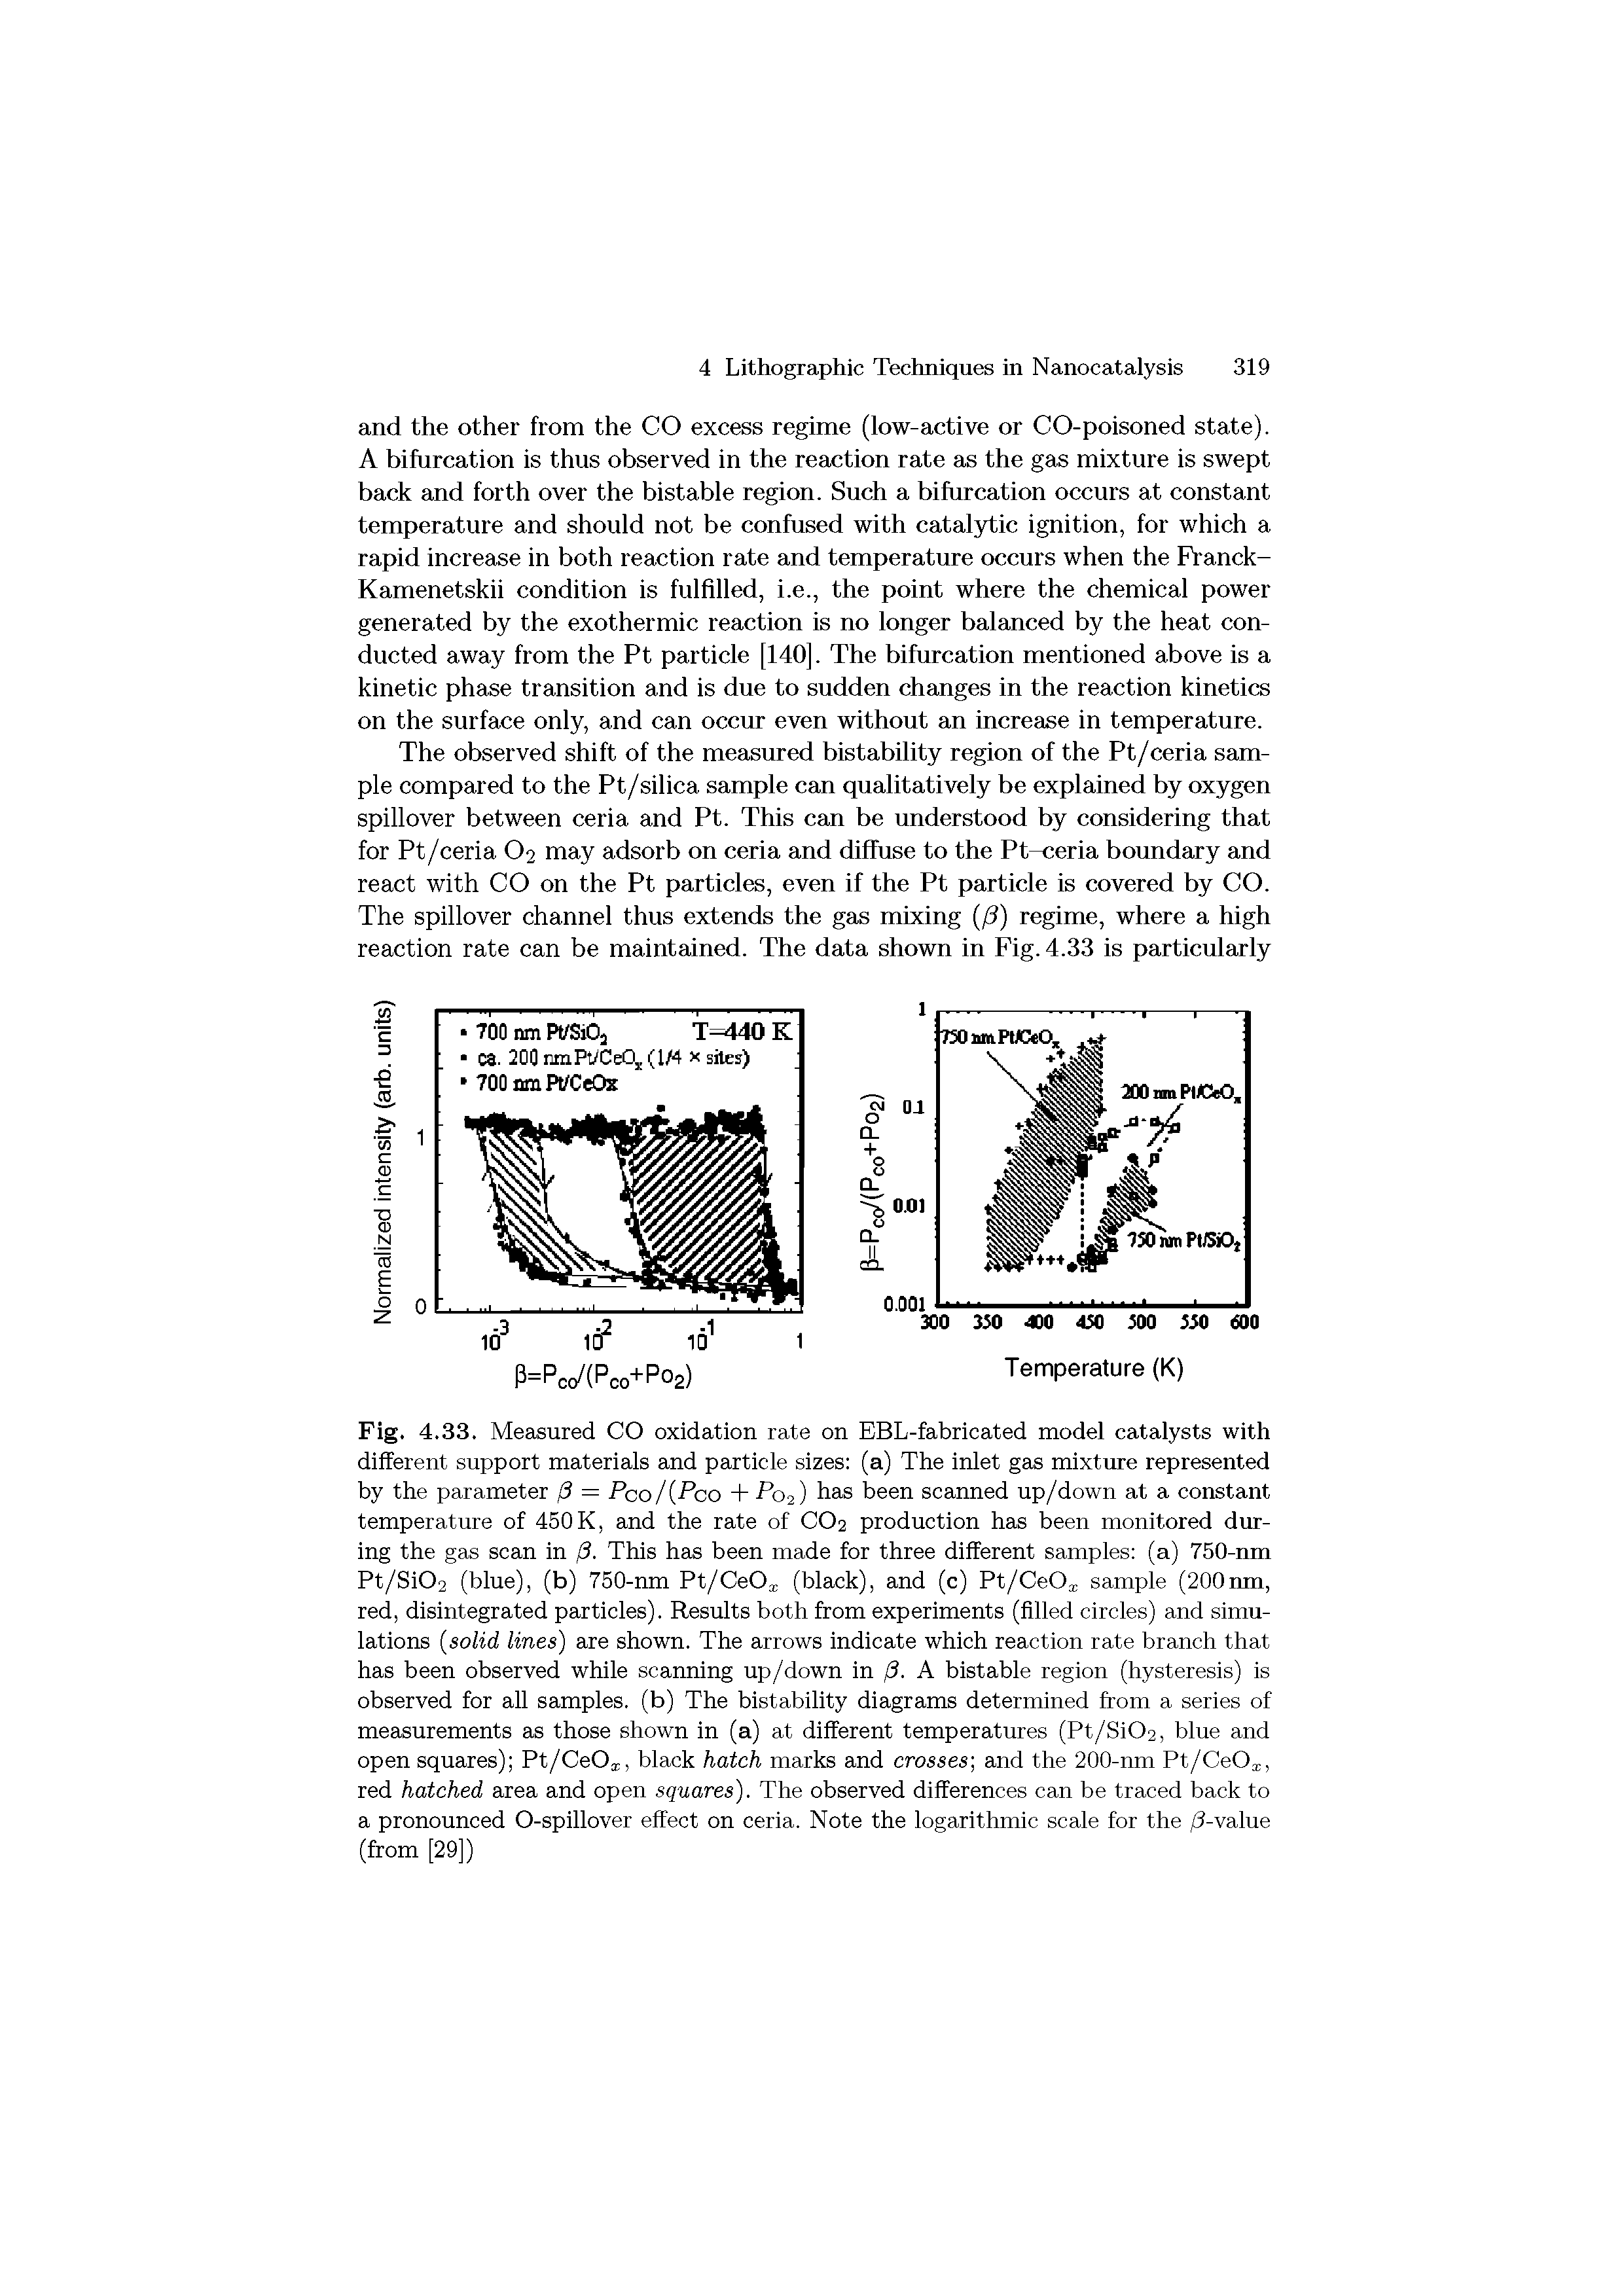 Fig. 4.33. Measured CO oxidation rate on EBL-fabricated model catalysts with different support materials and particle sizes (a) The inlet gas mixture represented by the parameter (3 = Pco/ Pco + P02) has been scanned up/down at a constant temperature of 450 K, and the rate of CO2 production has been monitored during the gas scan in j3. This has been made for three different samples (a) 750-nm Pt/Si02 (blue), (b) 750-nm Pt/CeOj, (black), and (c) Pt/CeOj, sample (200mn, red, disintegrated particles). Results both from experiments (filled circles) and simulations solid lines) are shown. The arrows indicate which reaction rate branch that has been observed while scanning up/down in (3. A bistable region (hysteresis) is observed for all samples, (b) The bistability diagrams determined from a series of measurements as those shown in (a) at different temperatures (Pt/Si02, blue and open squares) Pt/CeOj, black hatch marks and crosses and the 200-nm Pt/CeOj, red hatched area and open squares). The observed differences can be traced back to a pronounced O-spillover effect on ceria. Note the logarithmic scale for the /3-value (from [29])...